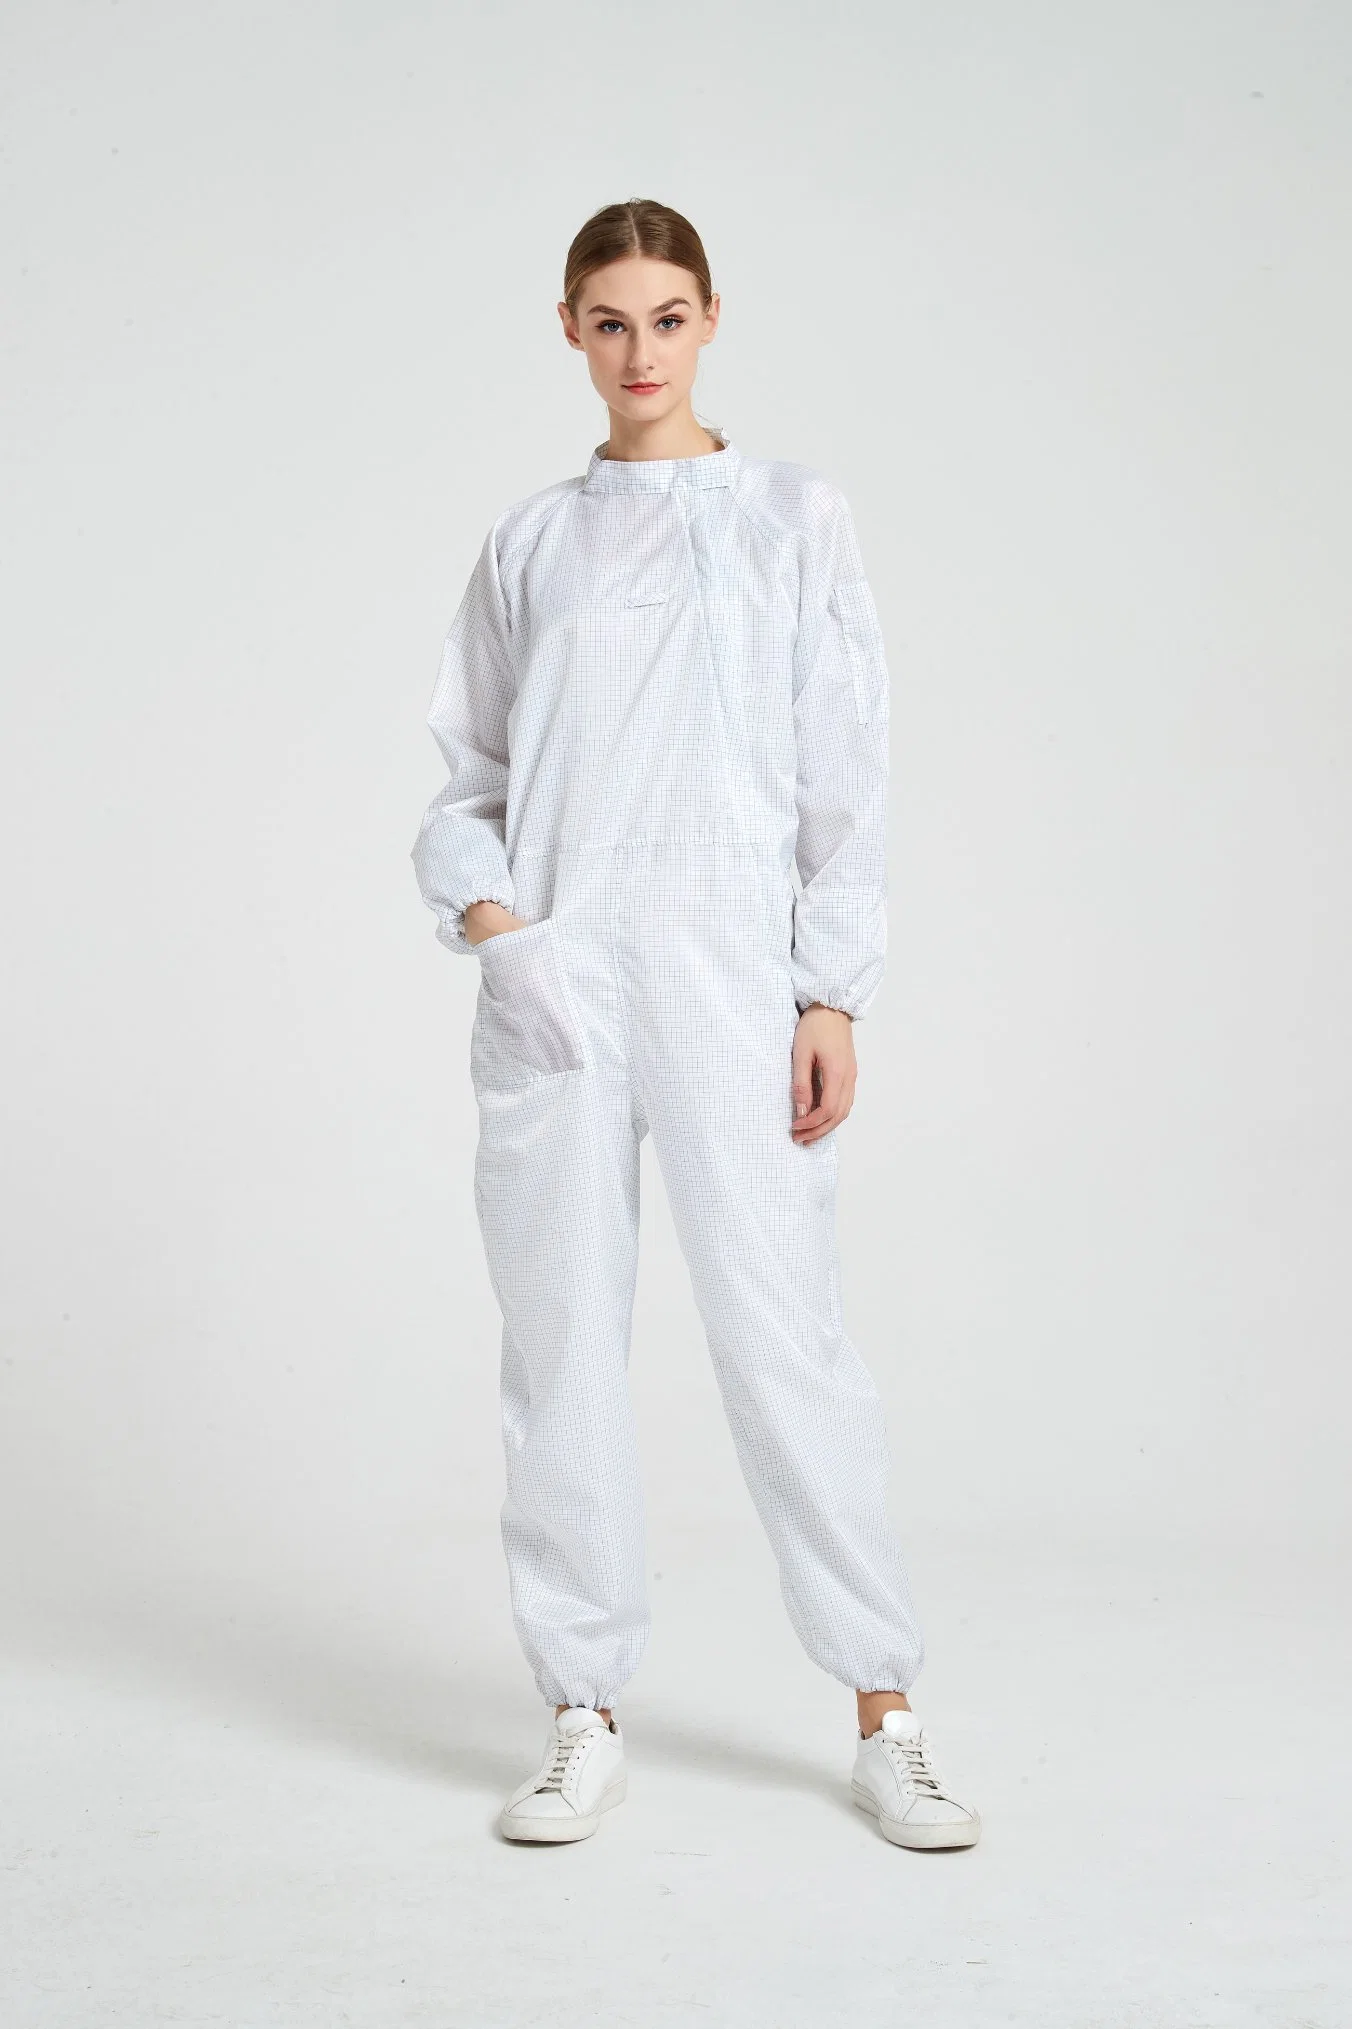 ESD Anti-Static Clean Room Clothing Grid Collar